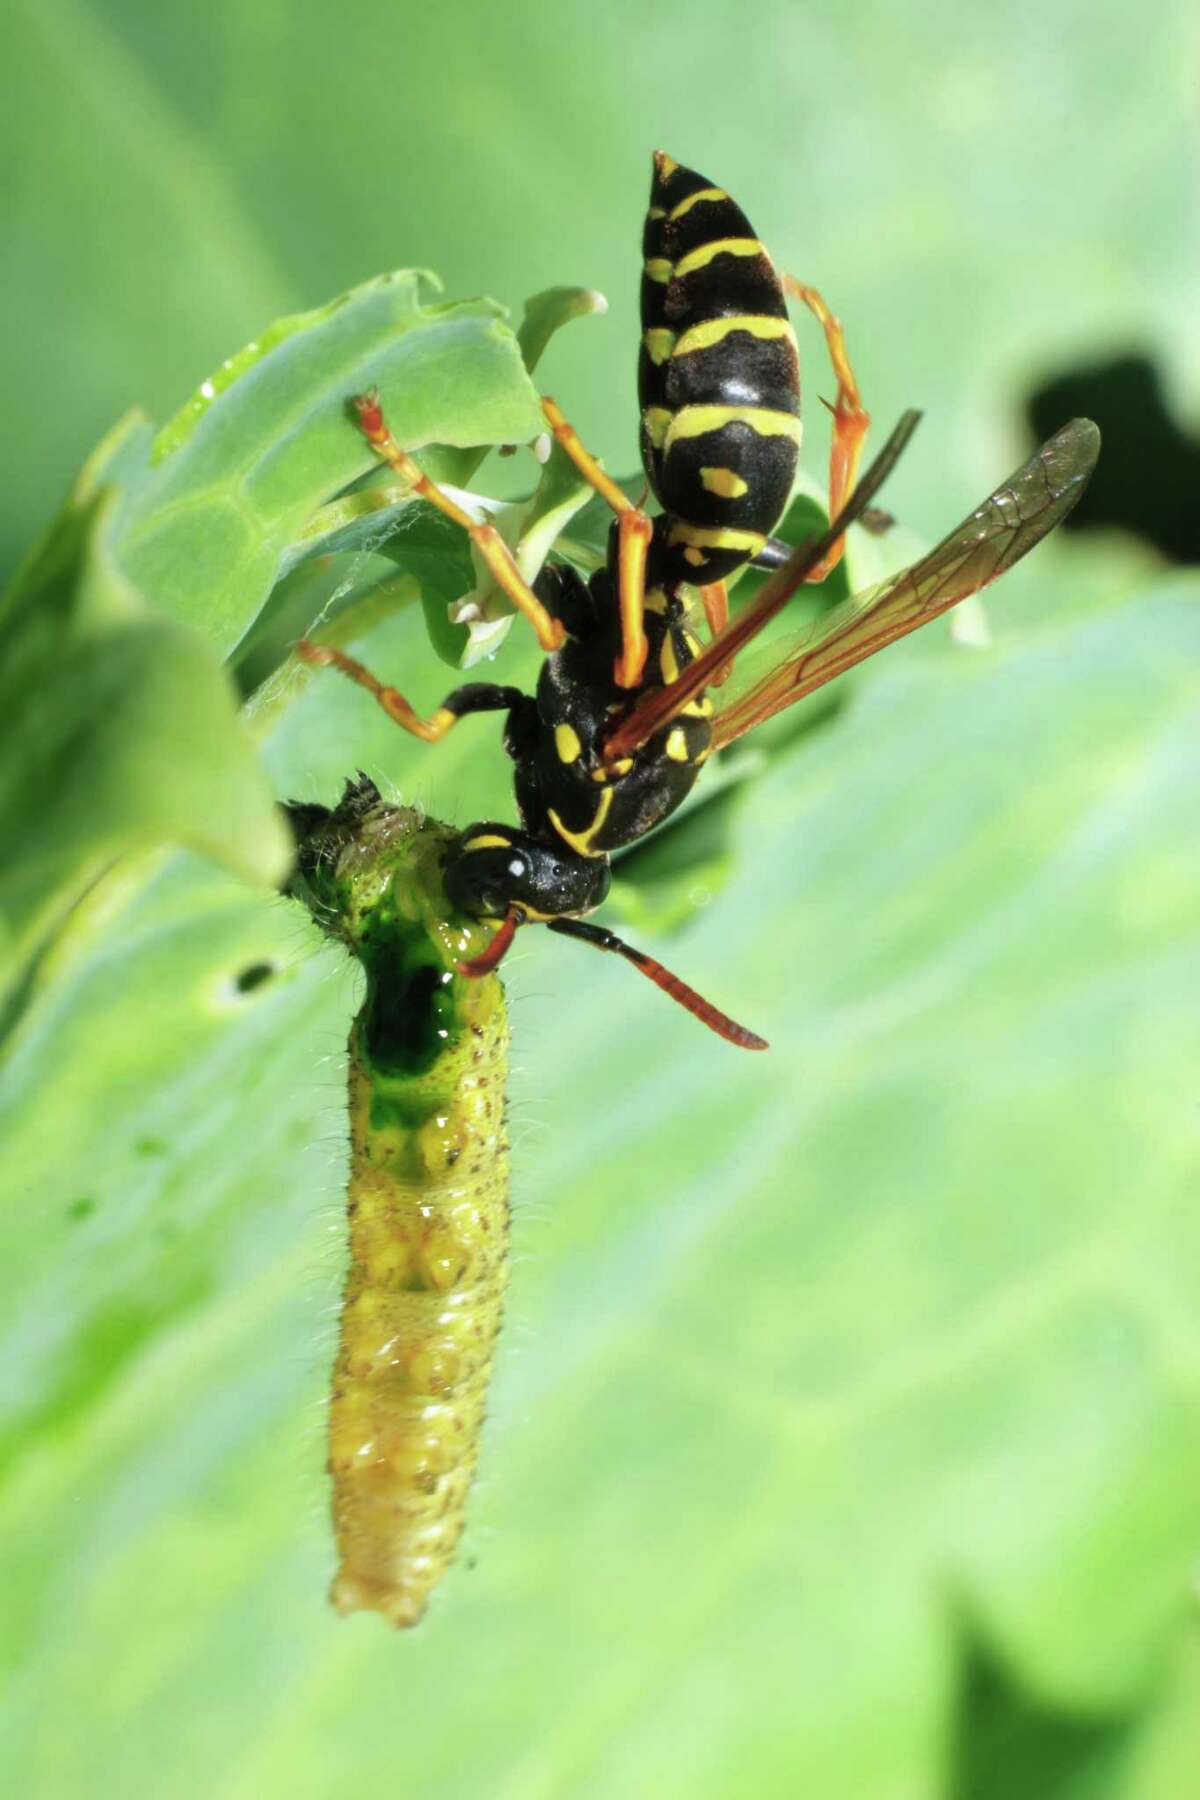 Paper wasps eat caterpillars and web worms, common garden pests.